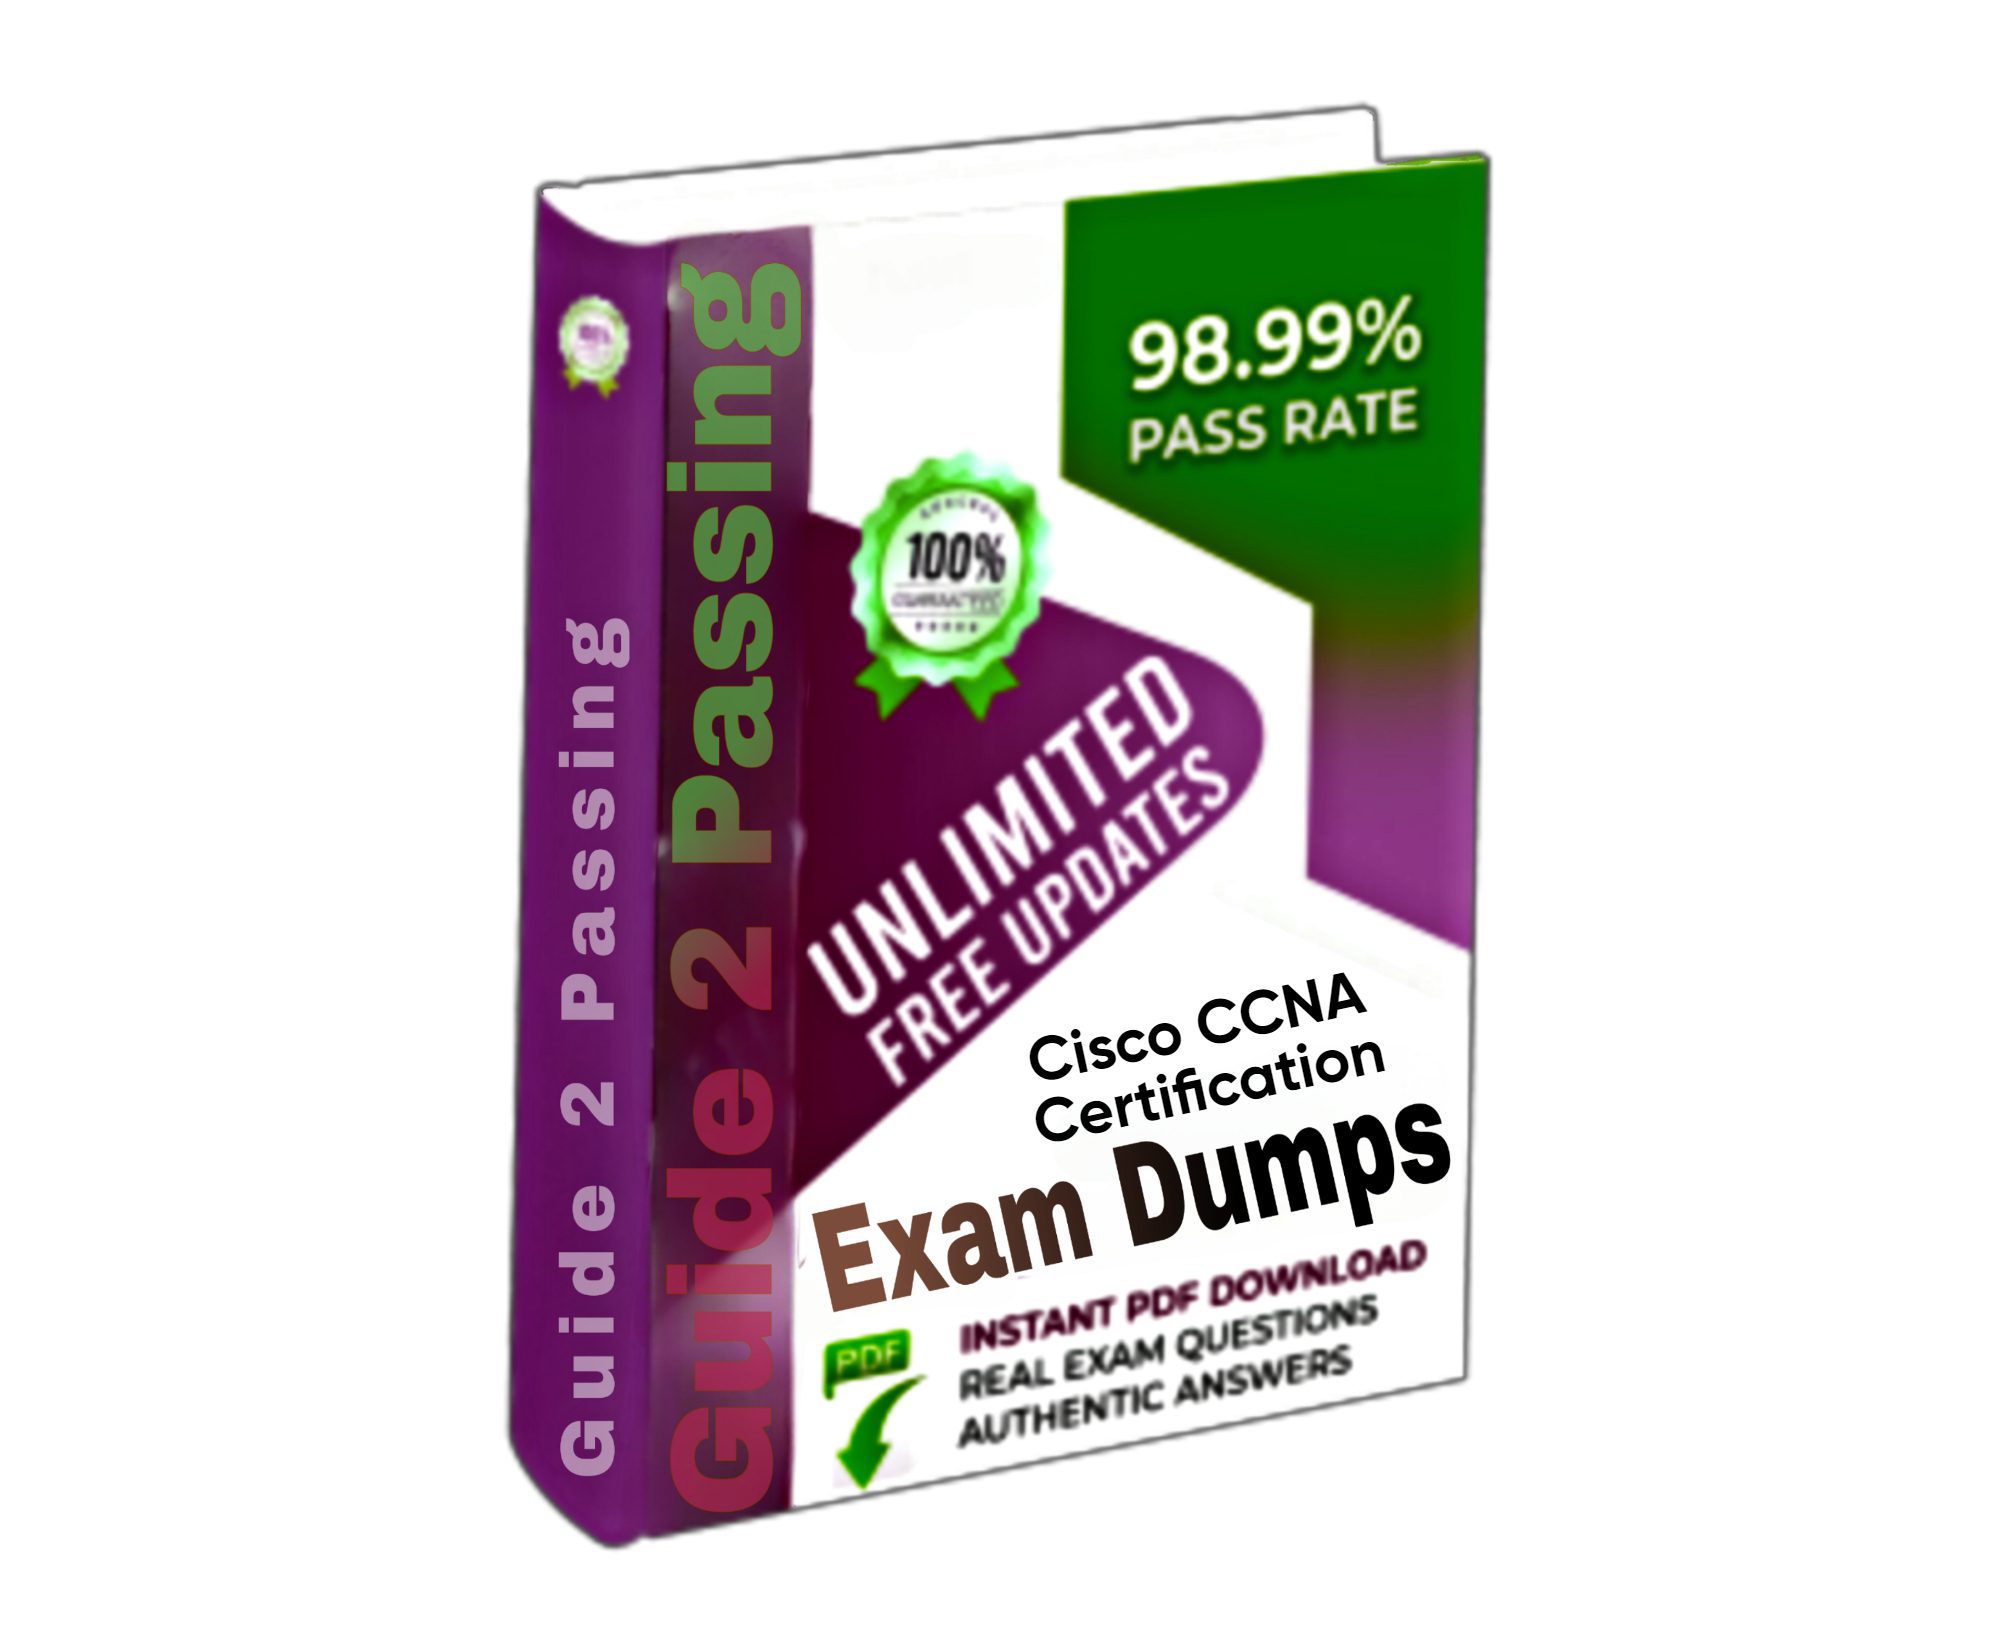 Pass Your Cisco CCNA Certification Exam Dumps From Guide 2 Passing